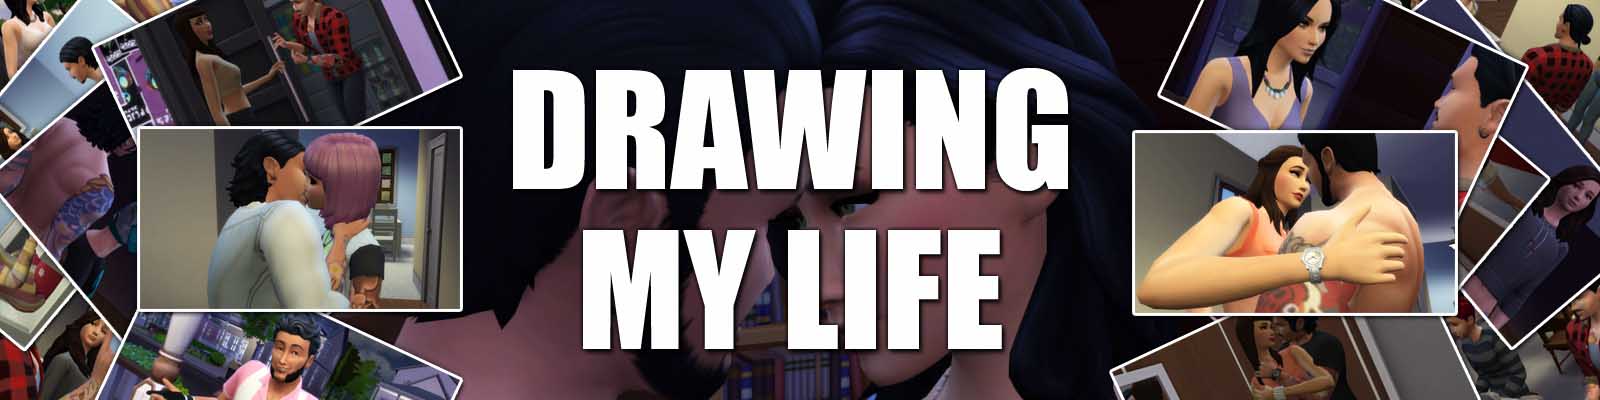 Drawing My Life 3d sex game